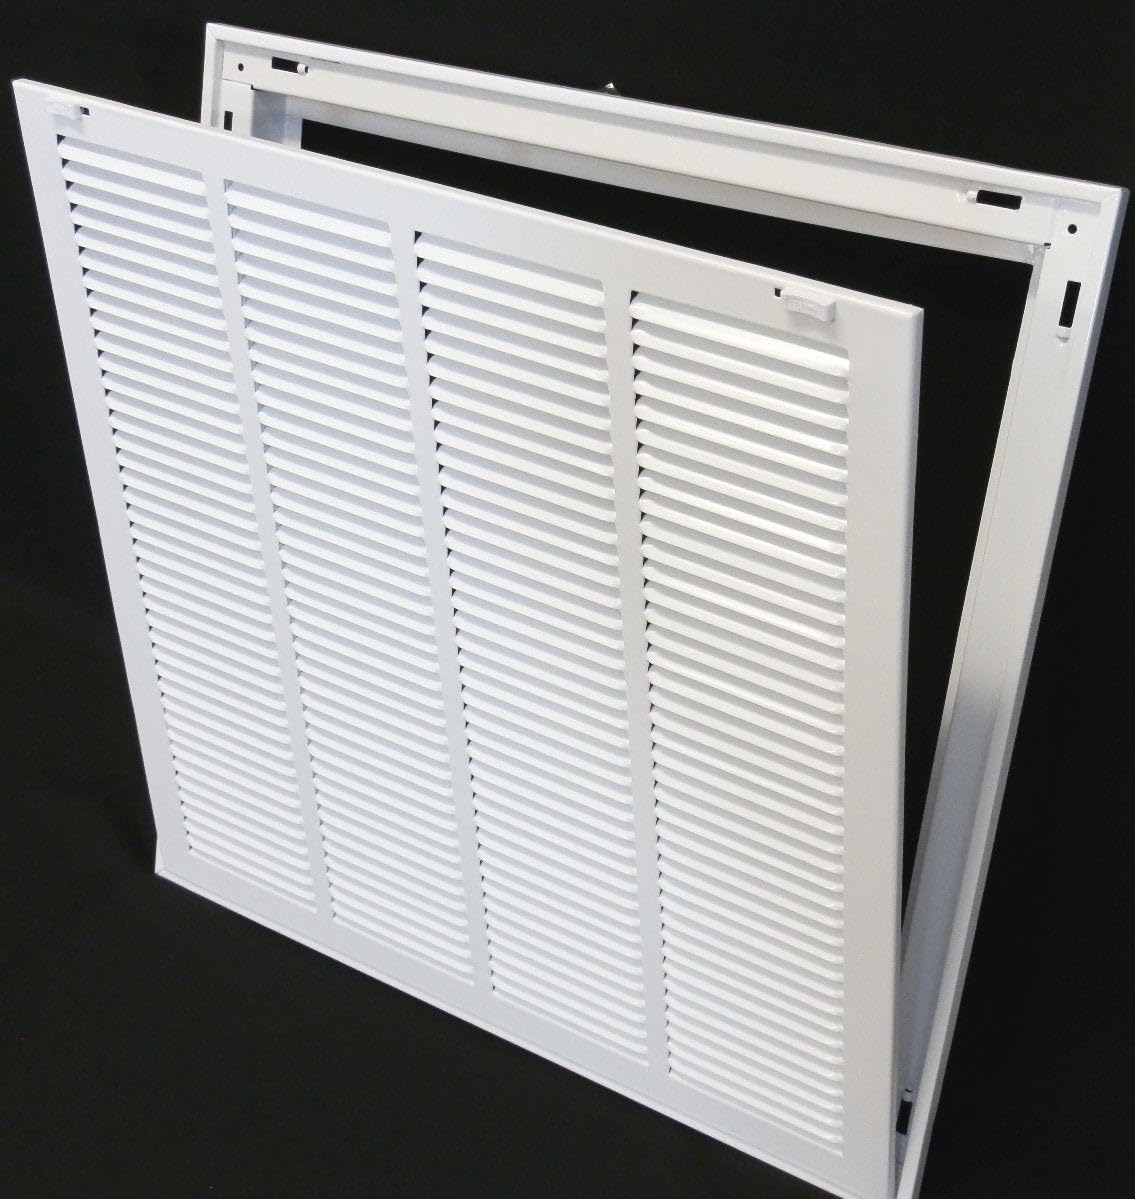 14&quot; X 6&quot; Steel Return Air Filter Grille for 1&quot; Filter - Removable Frame - [Outer Dimensions: 16 5/8&quot; X 8 5/8&quot;]